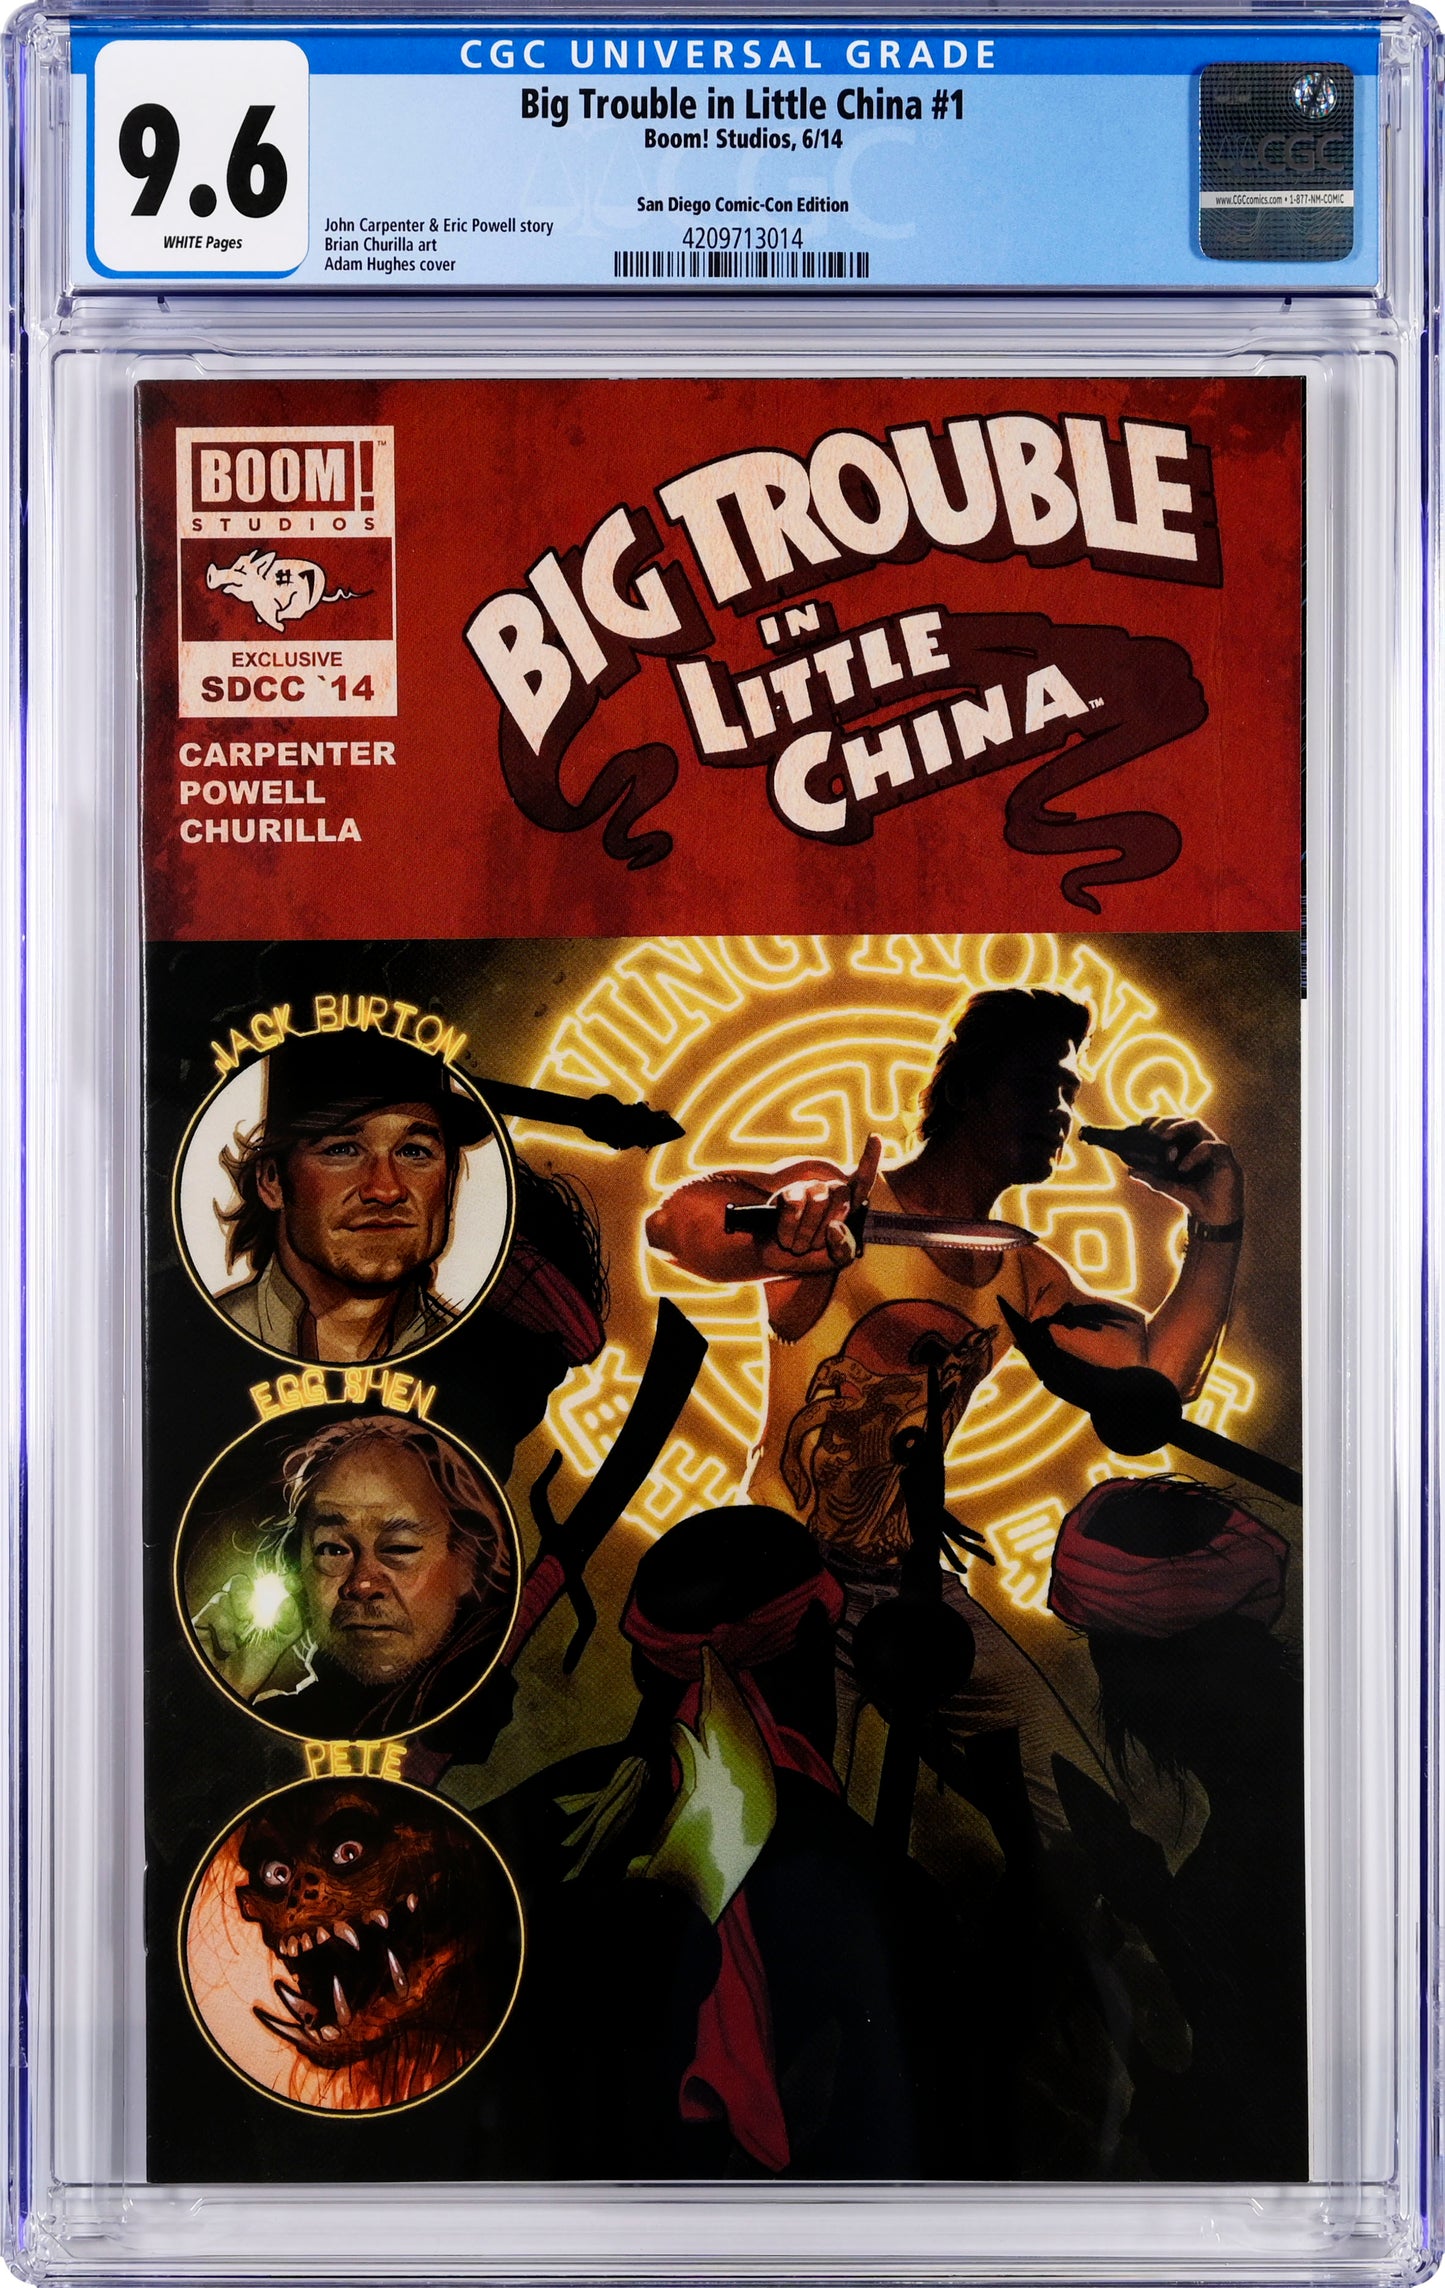 Big Trouble In Little China #1 - CGC 9.6 - Rare SDCC Variant